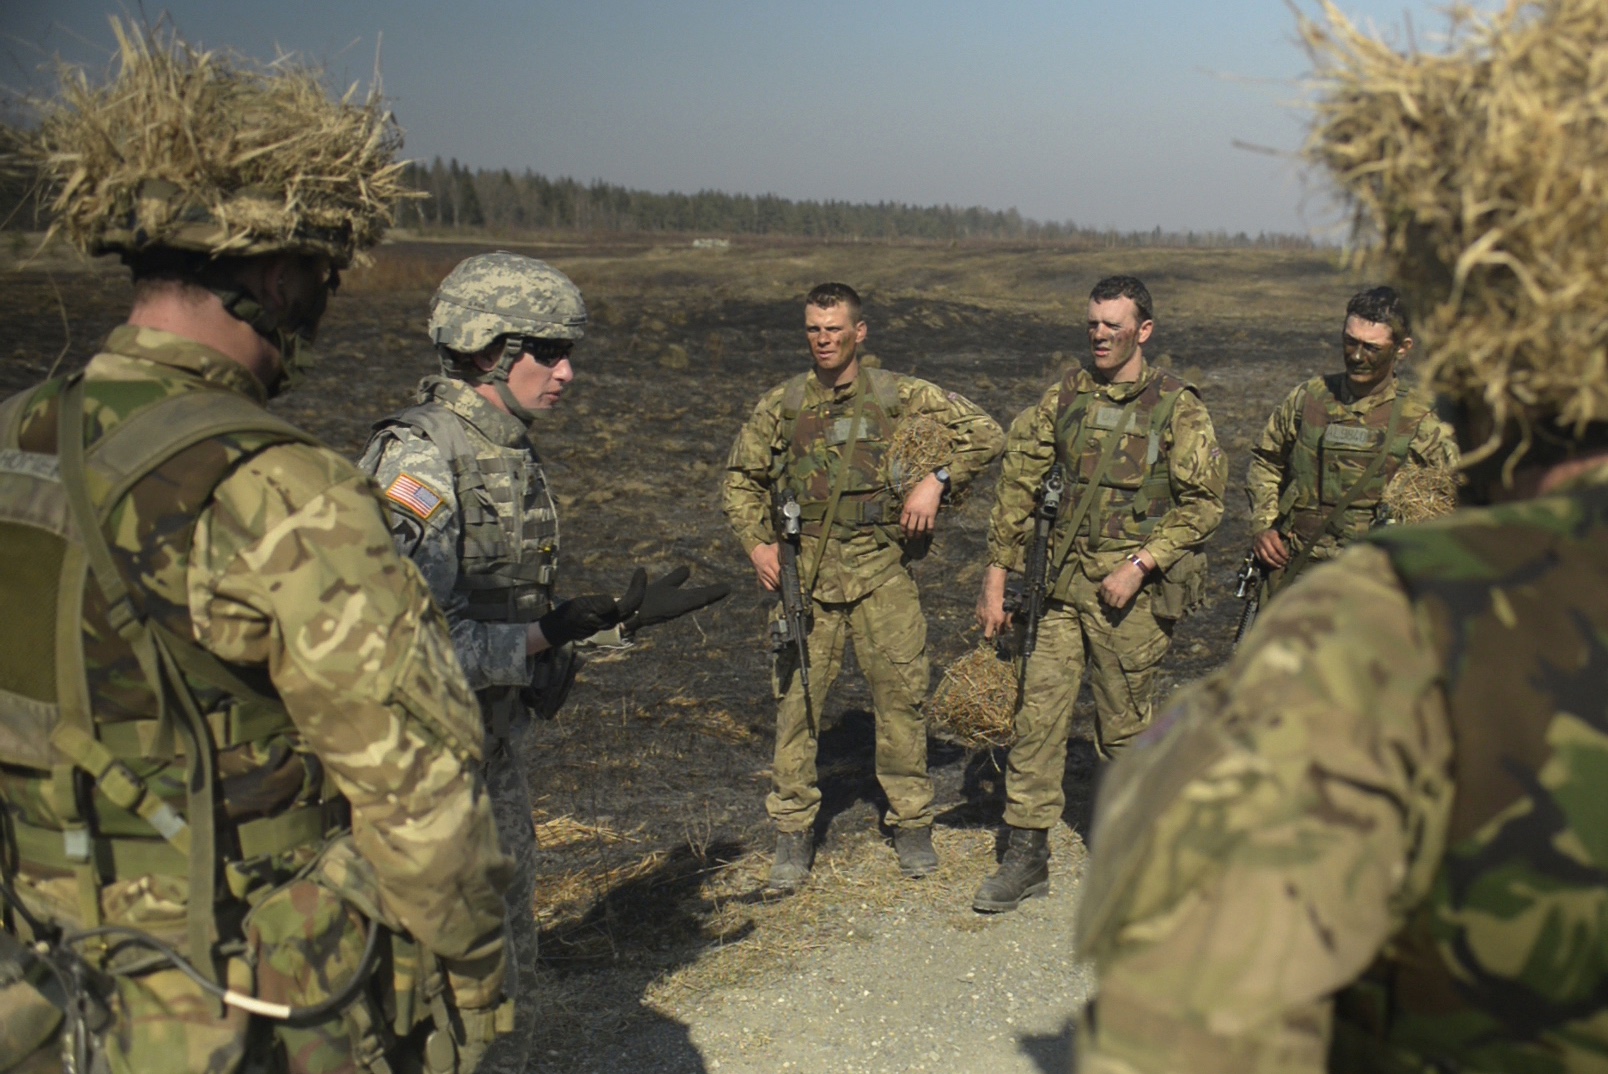 A U.S. Army second lieutenant and a current cadet at the British Army's Royal Military Academy Sandhurst, listens to feedback during an after-action review of a squad live-fire attack at the Grafenwoehr Training Area, Germany, March 13, 2014